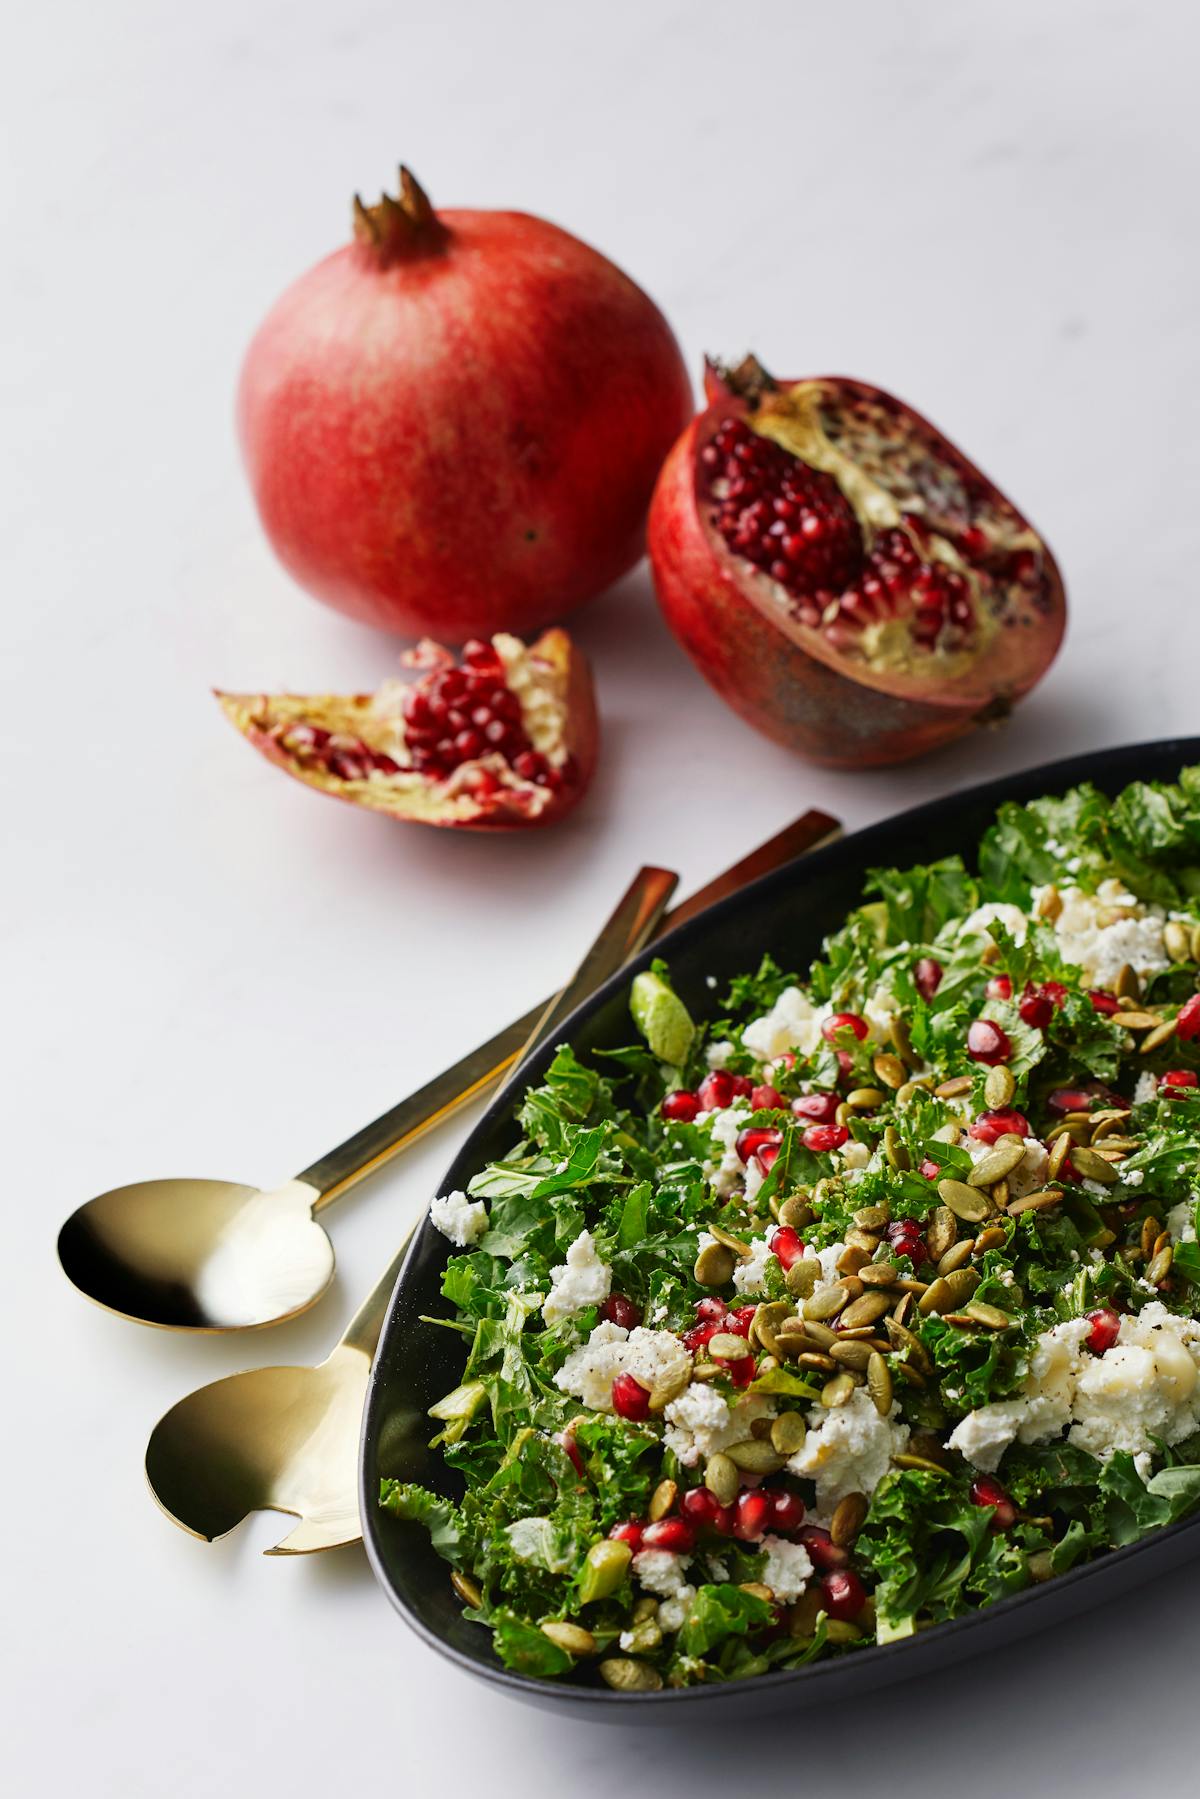 Kale salad with goat cheese and pomegranate